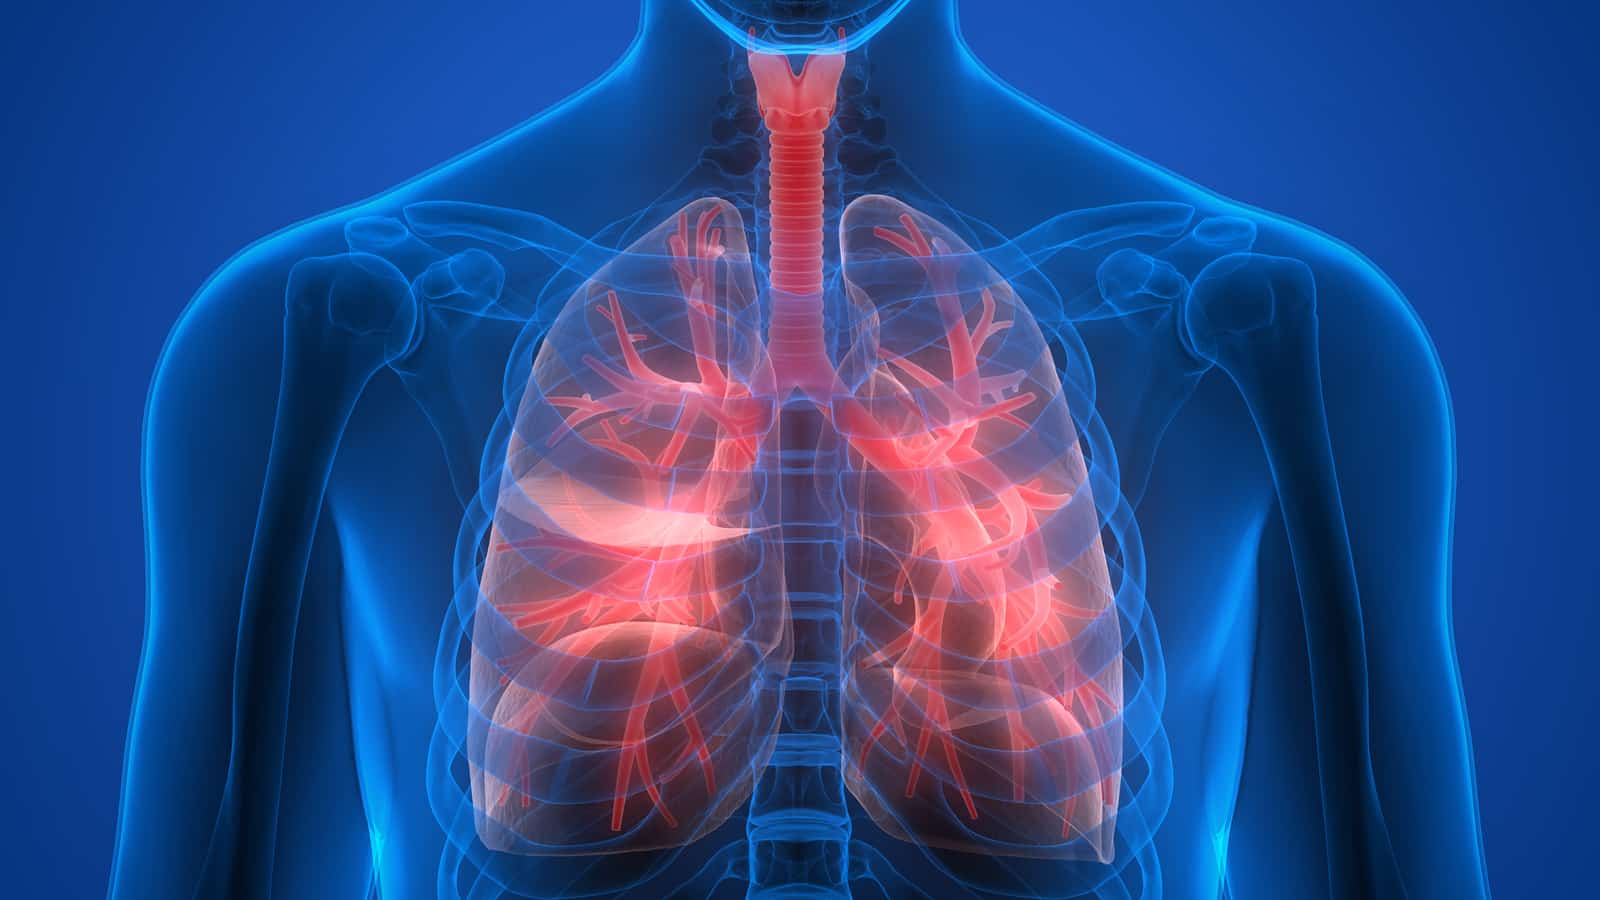 x-ray of chest showing lungs with red indicating inflamation. Demonstrates the link between opioid use and pulmonary conditions